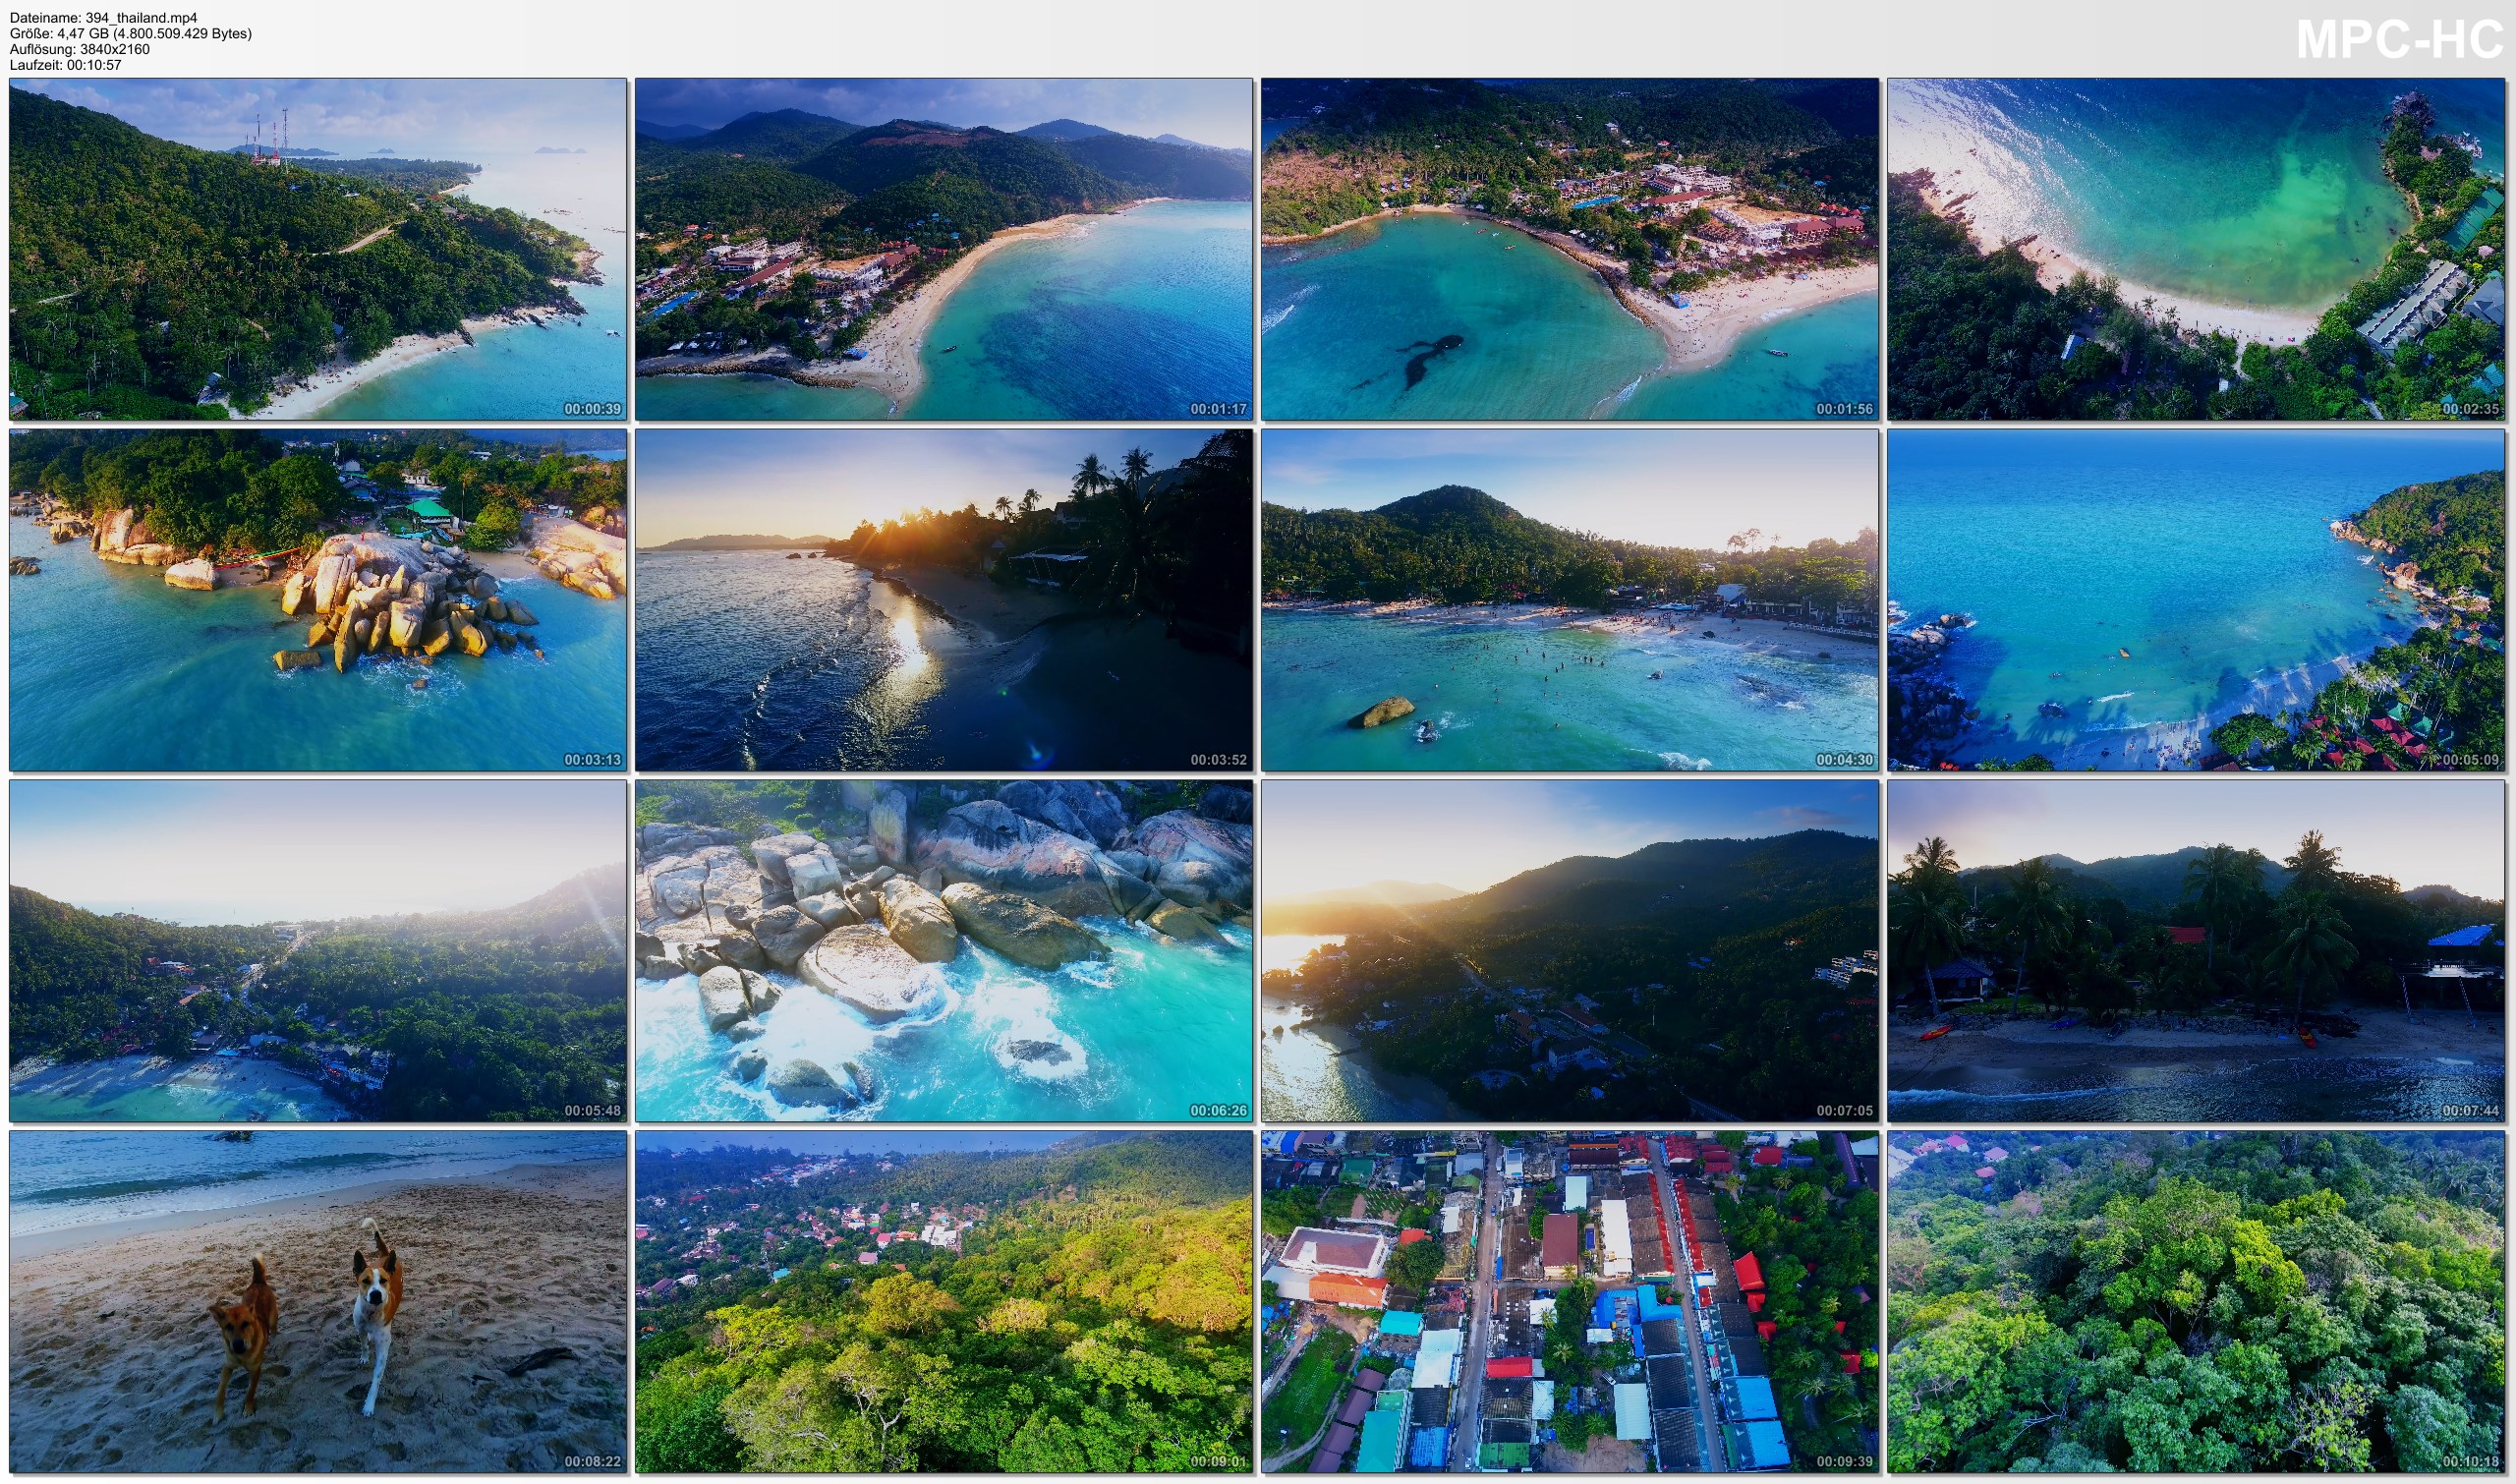 Drone Pictures from Video 【4K】Drone Footage | THAILANDs ISLANDS 2019 ..:: Cinematic Aerial Film | Ko Phangan Ko Samui Koh Tao